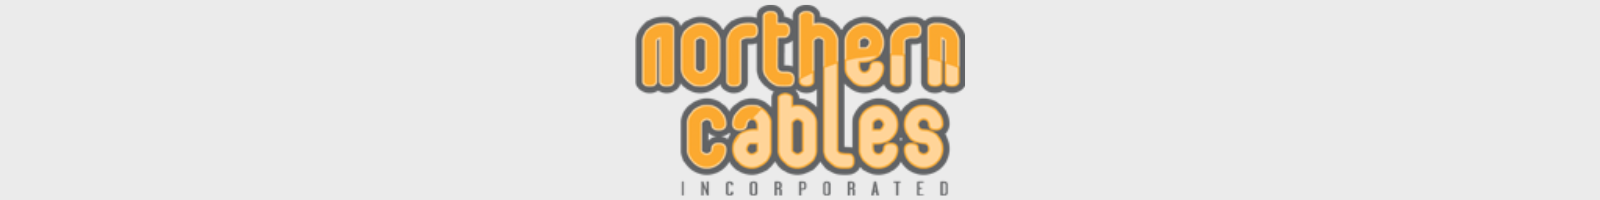 northern cables logo